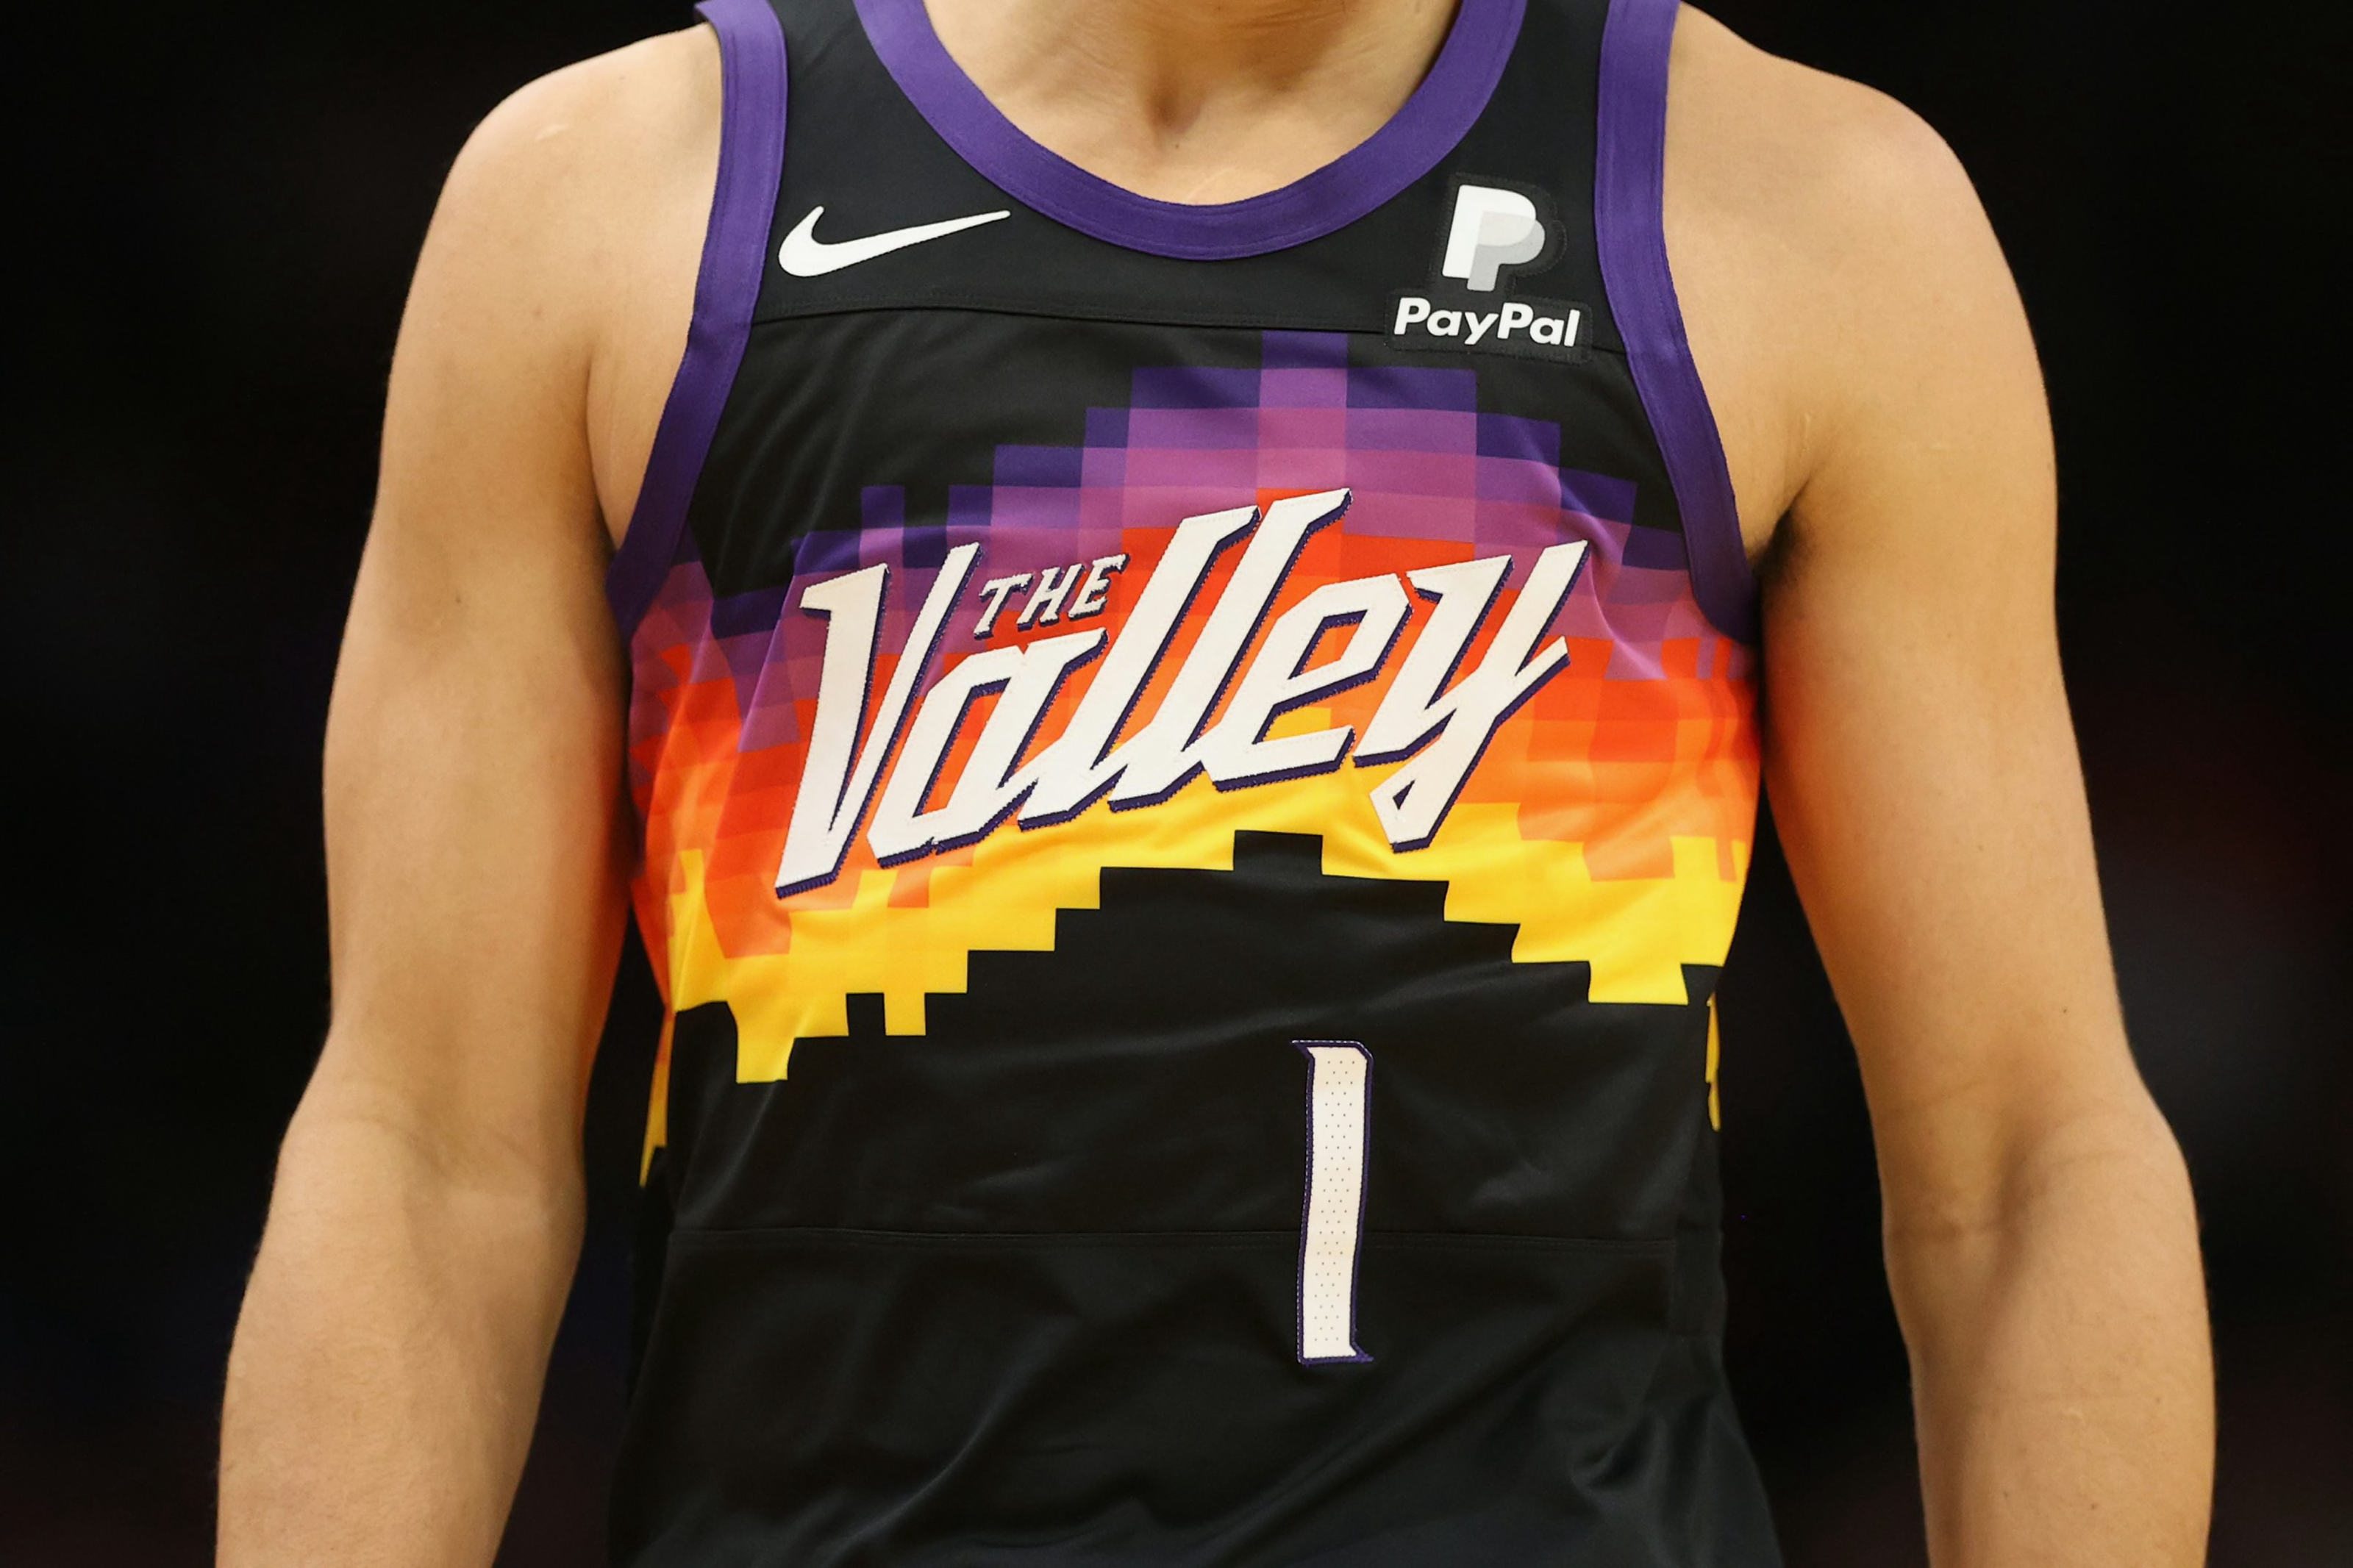 Every NBA City Edition jersey, ranked 